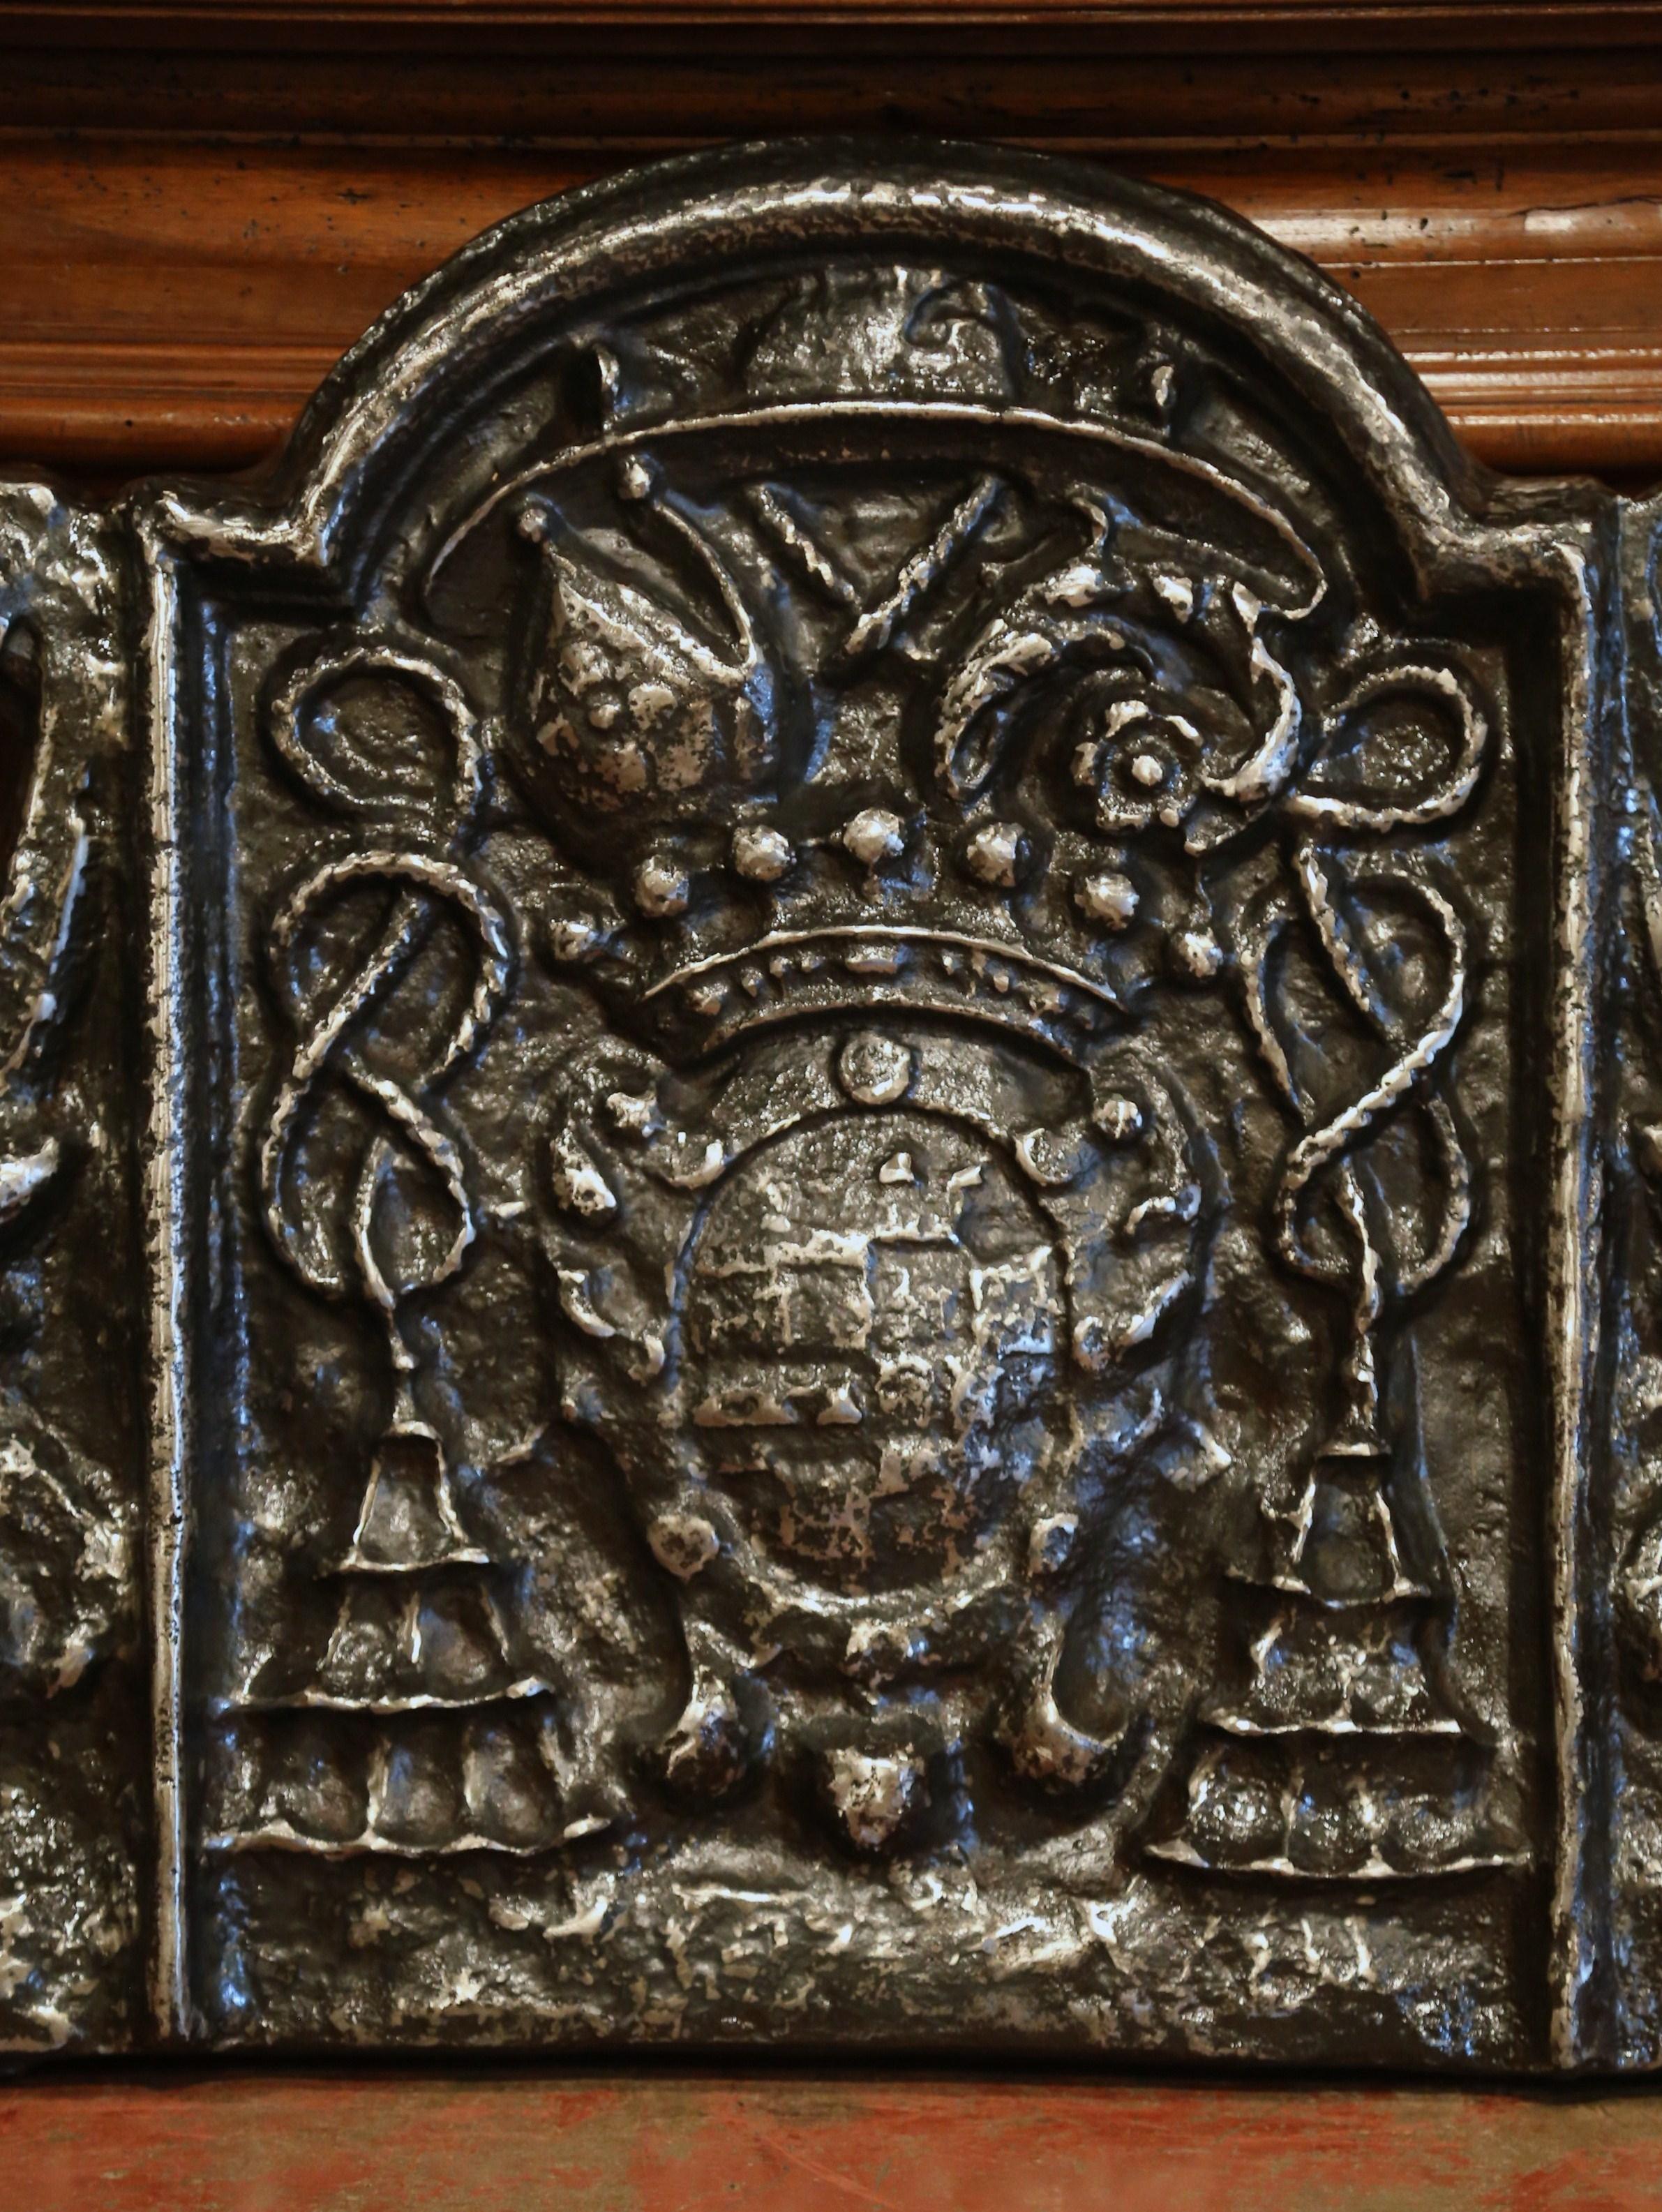 This massive French antique fire back was crafted in Southern France, circa 1750. With an arched top and scrolled sides, the thick fireplace essential features a aristocratic family coat of arms topped with a regal crown. The heavy decorated forged